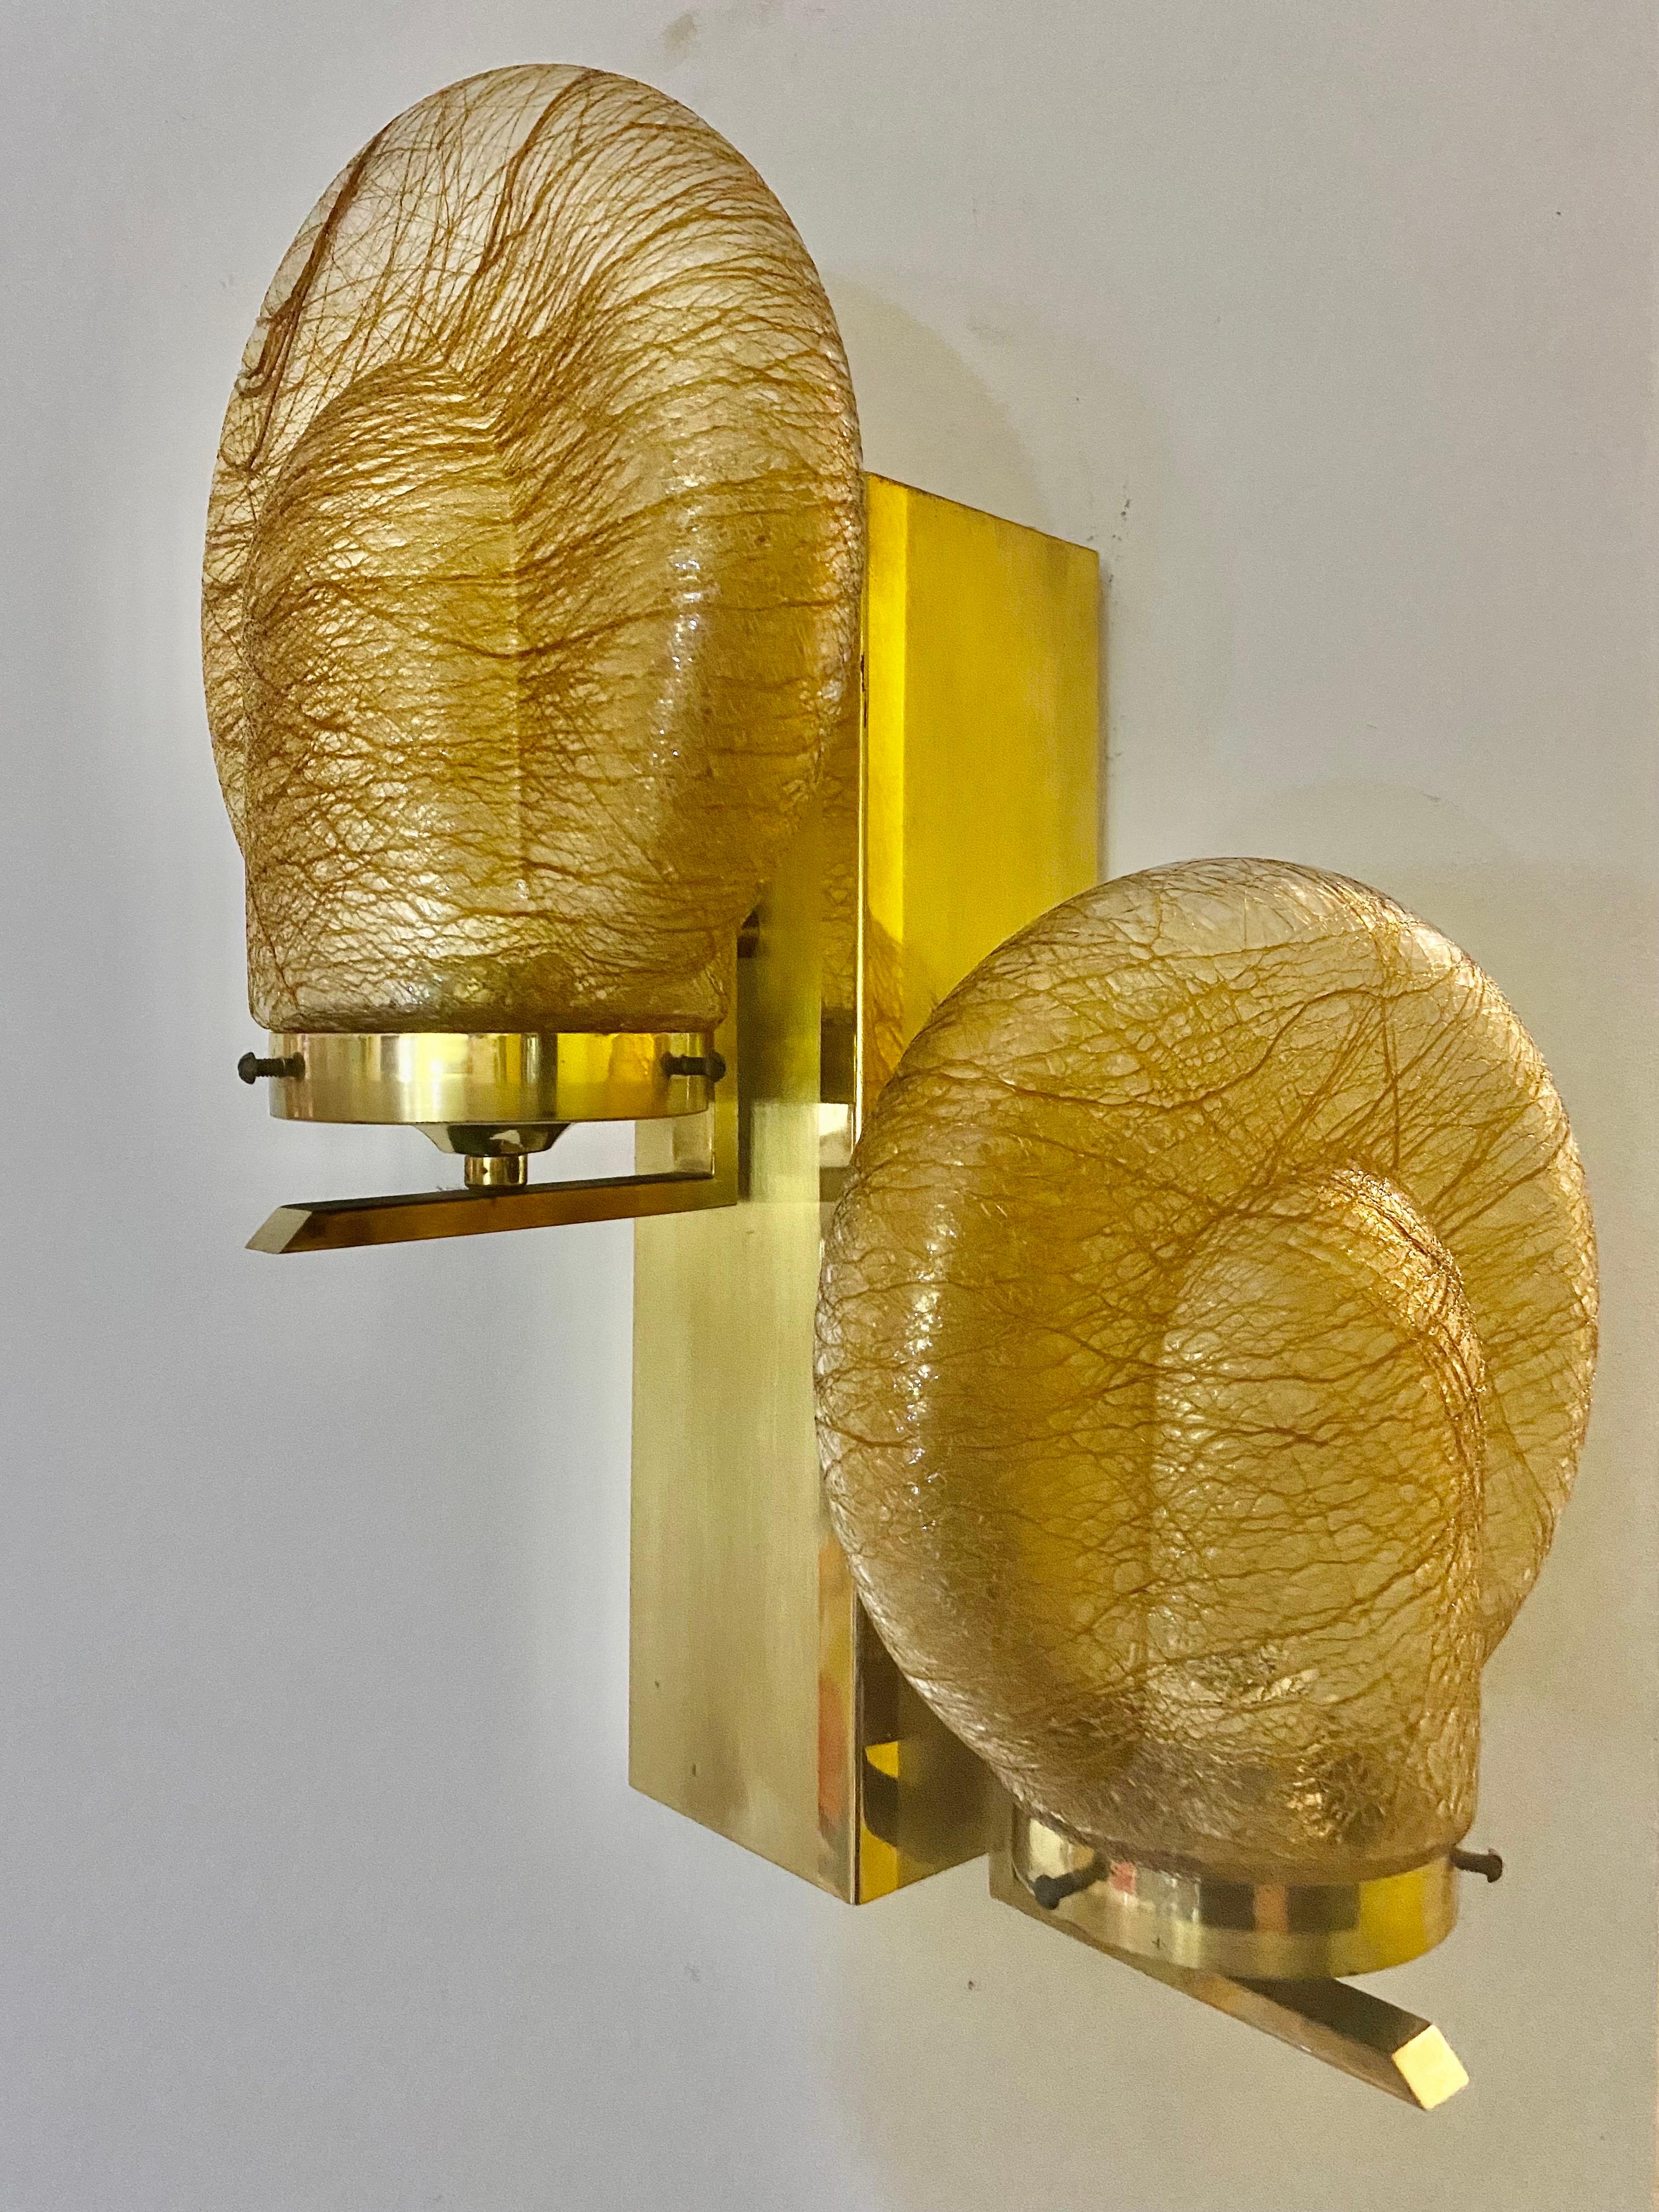 Sconce / wall lamp by Sciolari in glass with brass structure.

discount shipping * private quote option 

The design and the quality of the glass make this piece the best of Italian design.
This superb murano glass sconce / wall lamp are